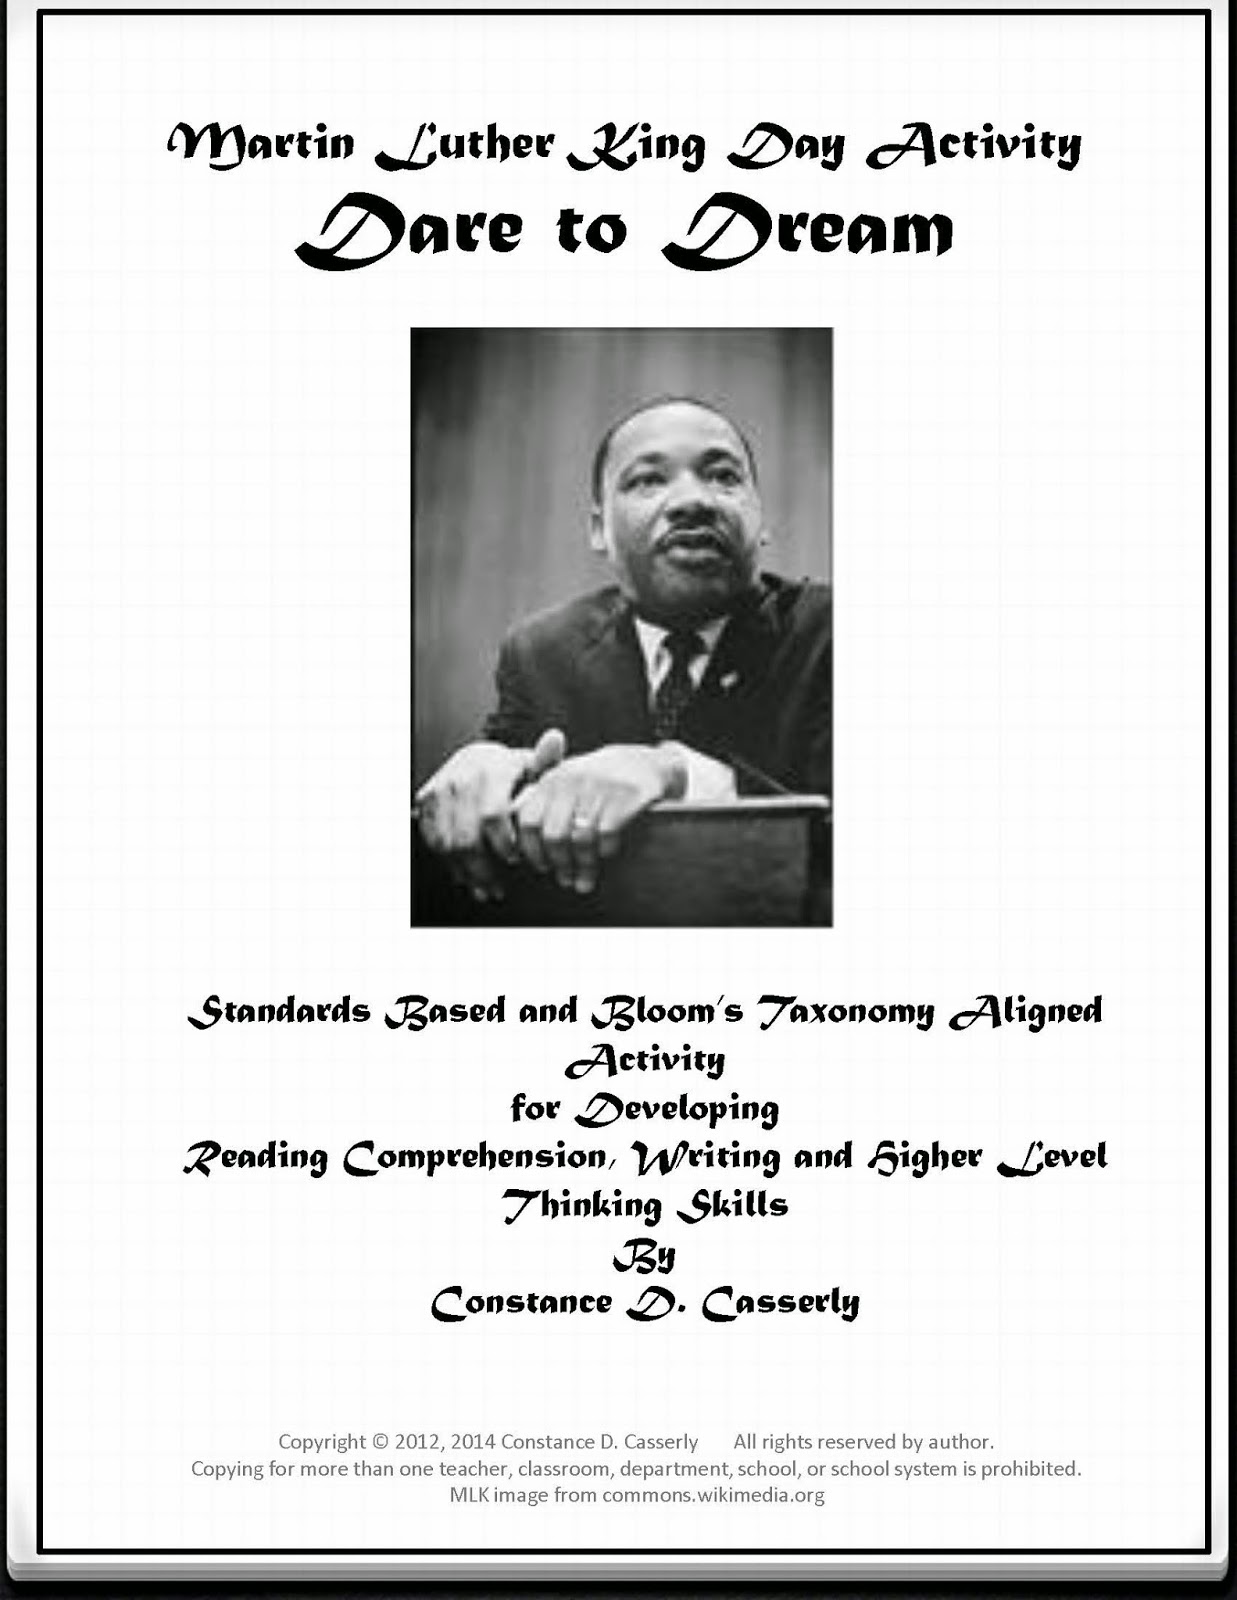 "Martin Luther King Day Activity - 'Dare to Dream'"